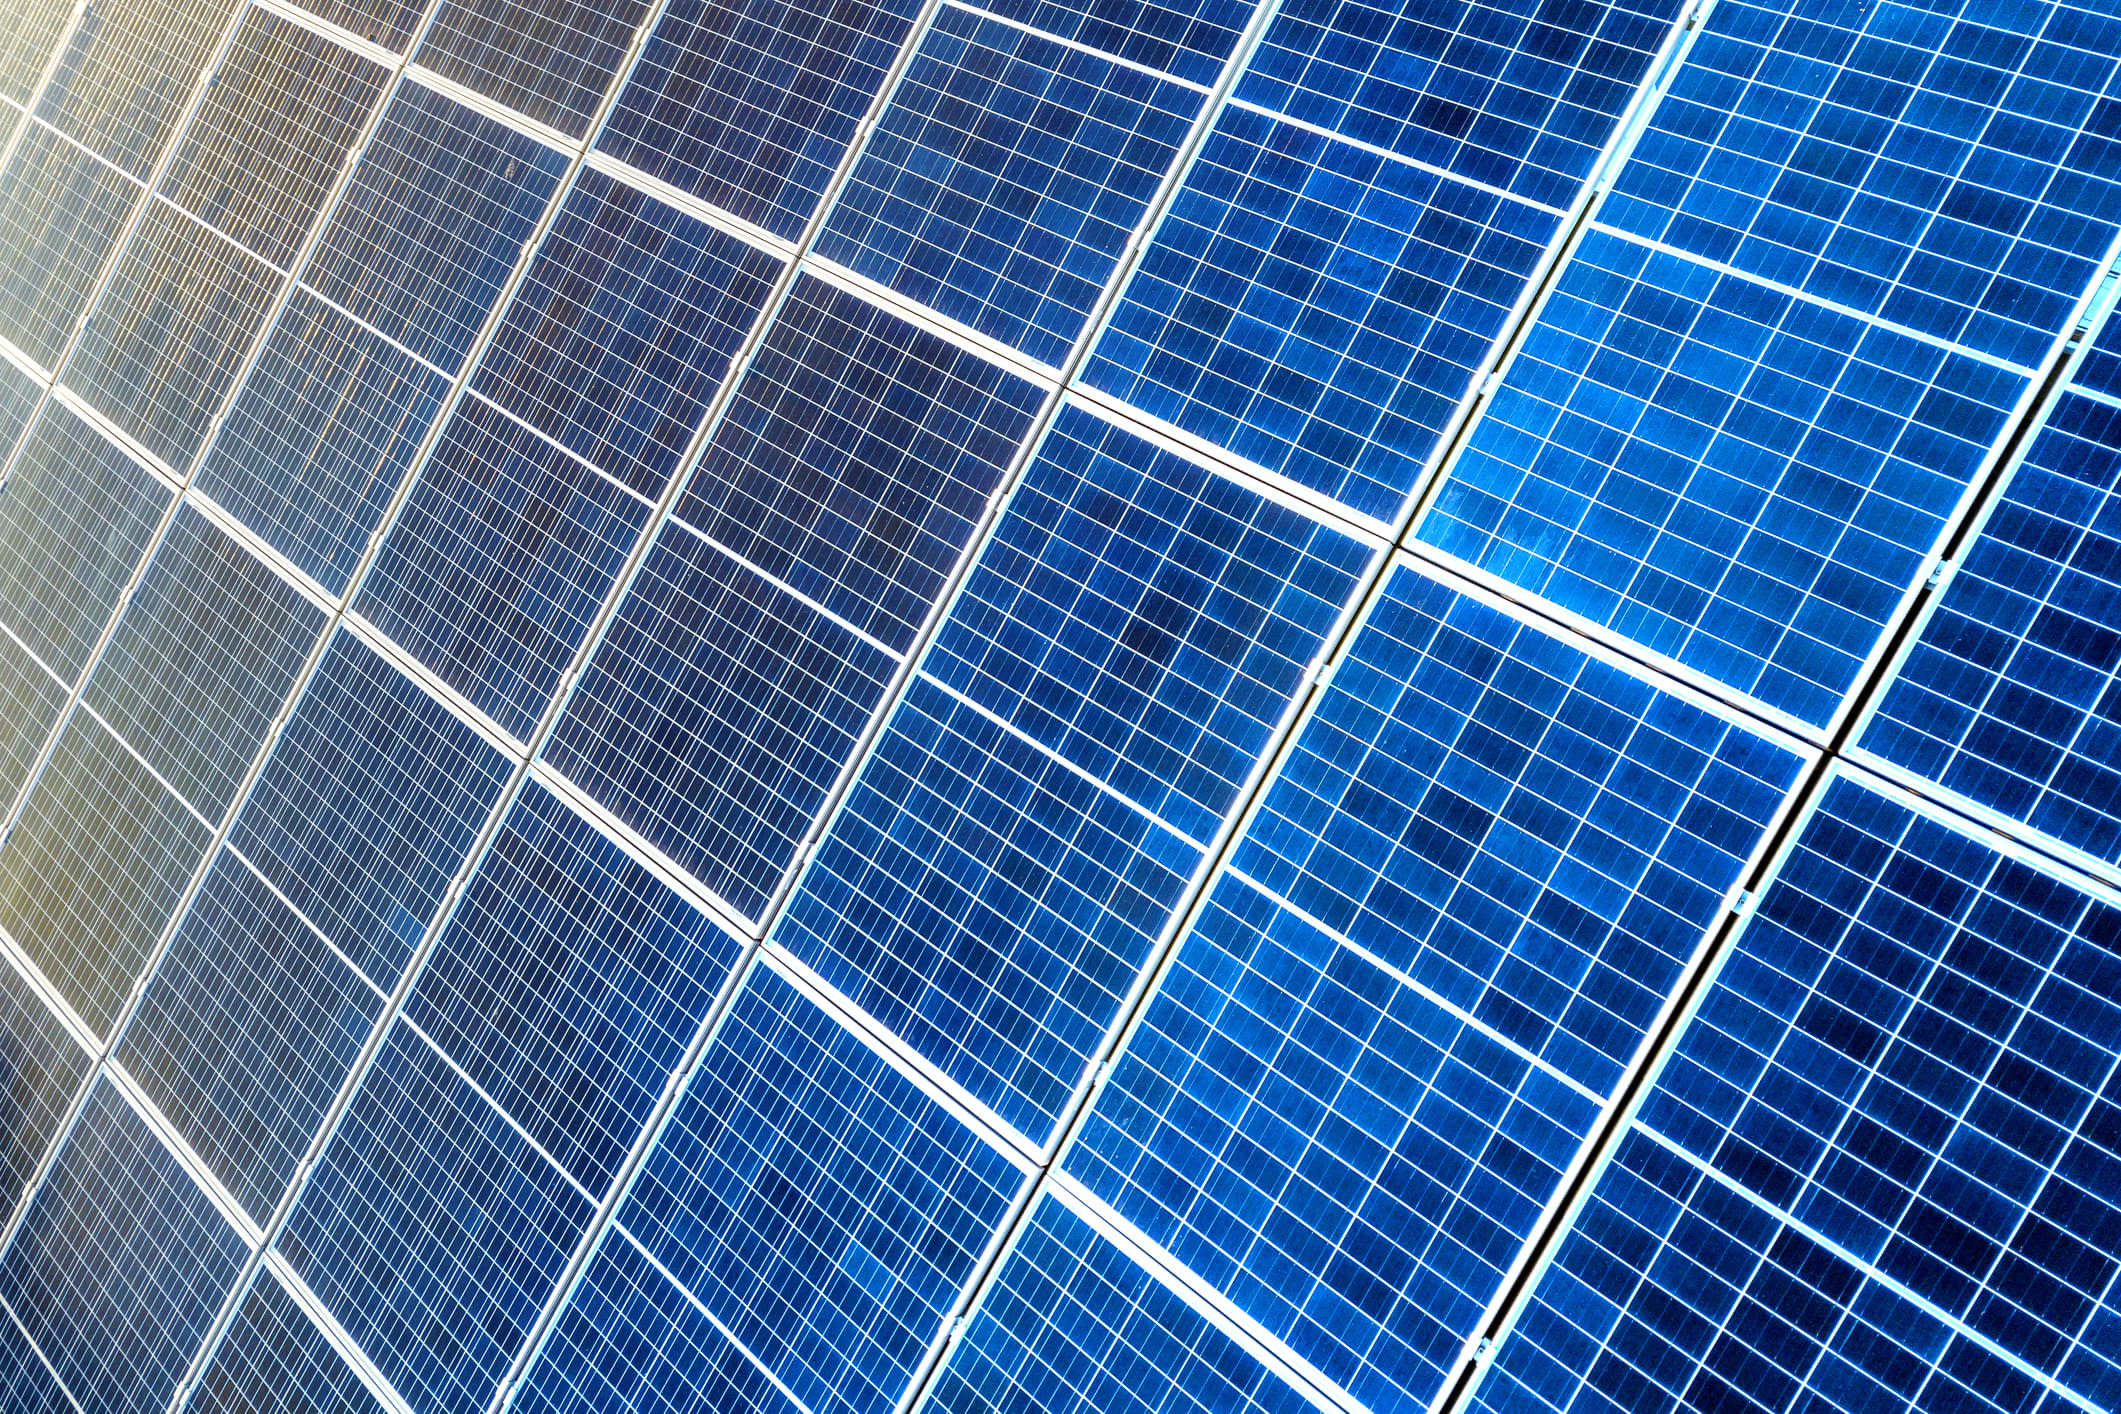 The U.S. photo voltaic business posted document development in 2020 regardless of Covid-19, new report finds